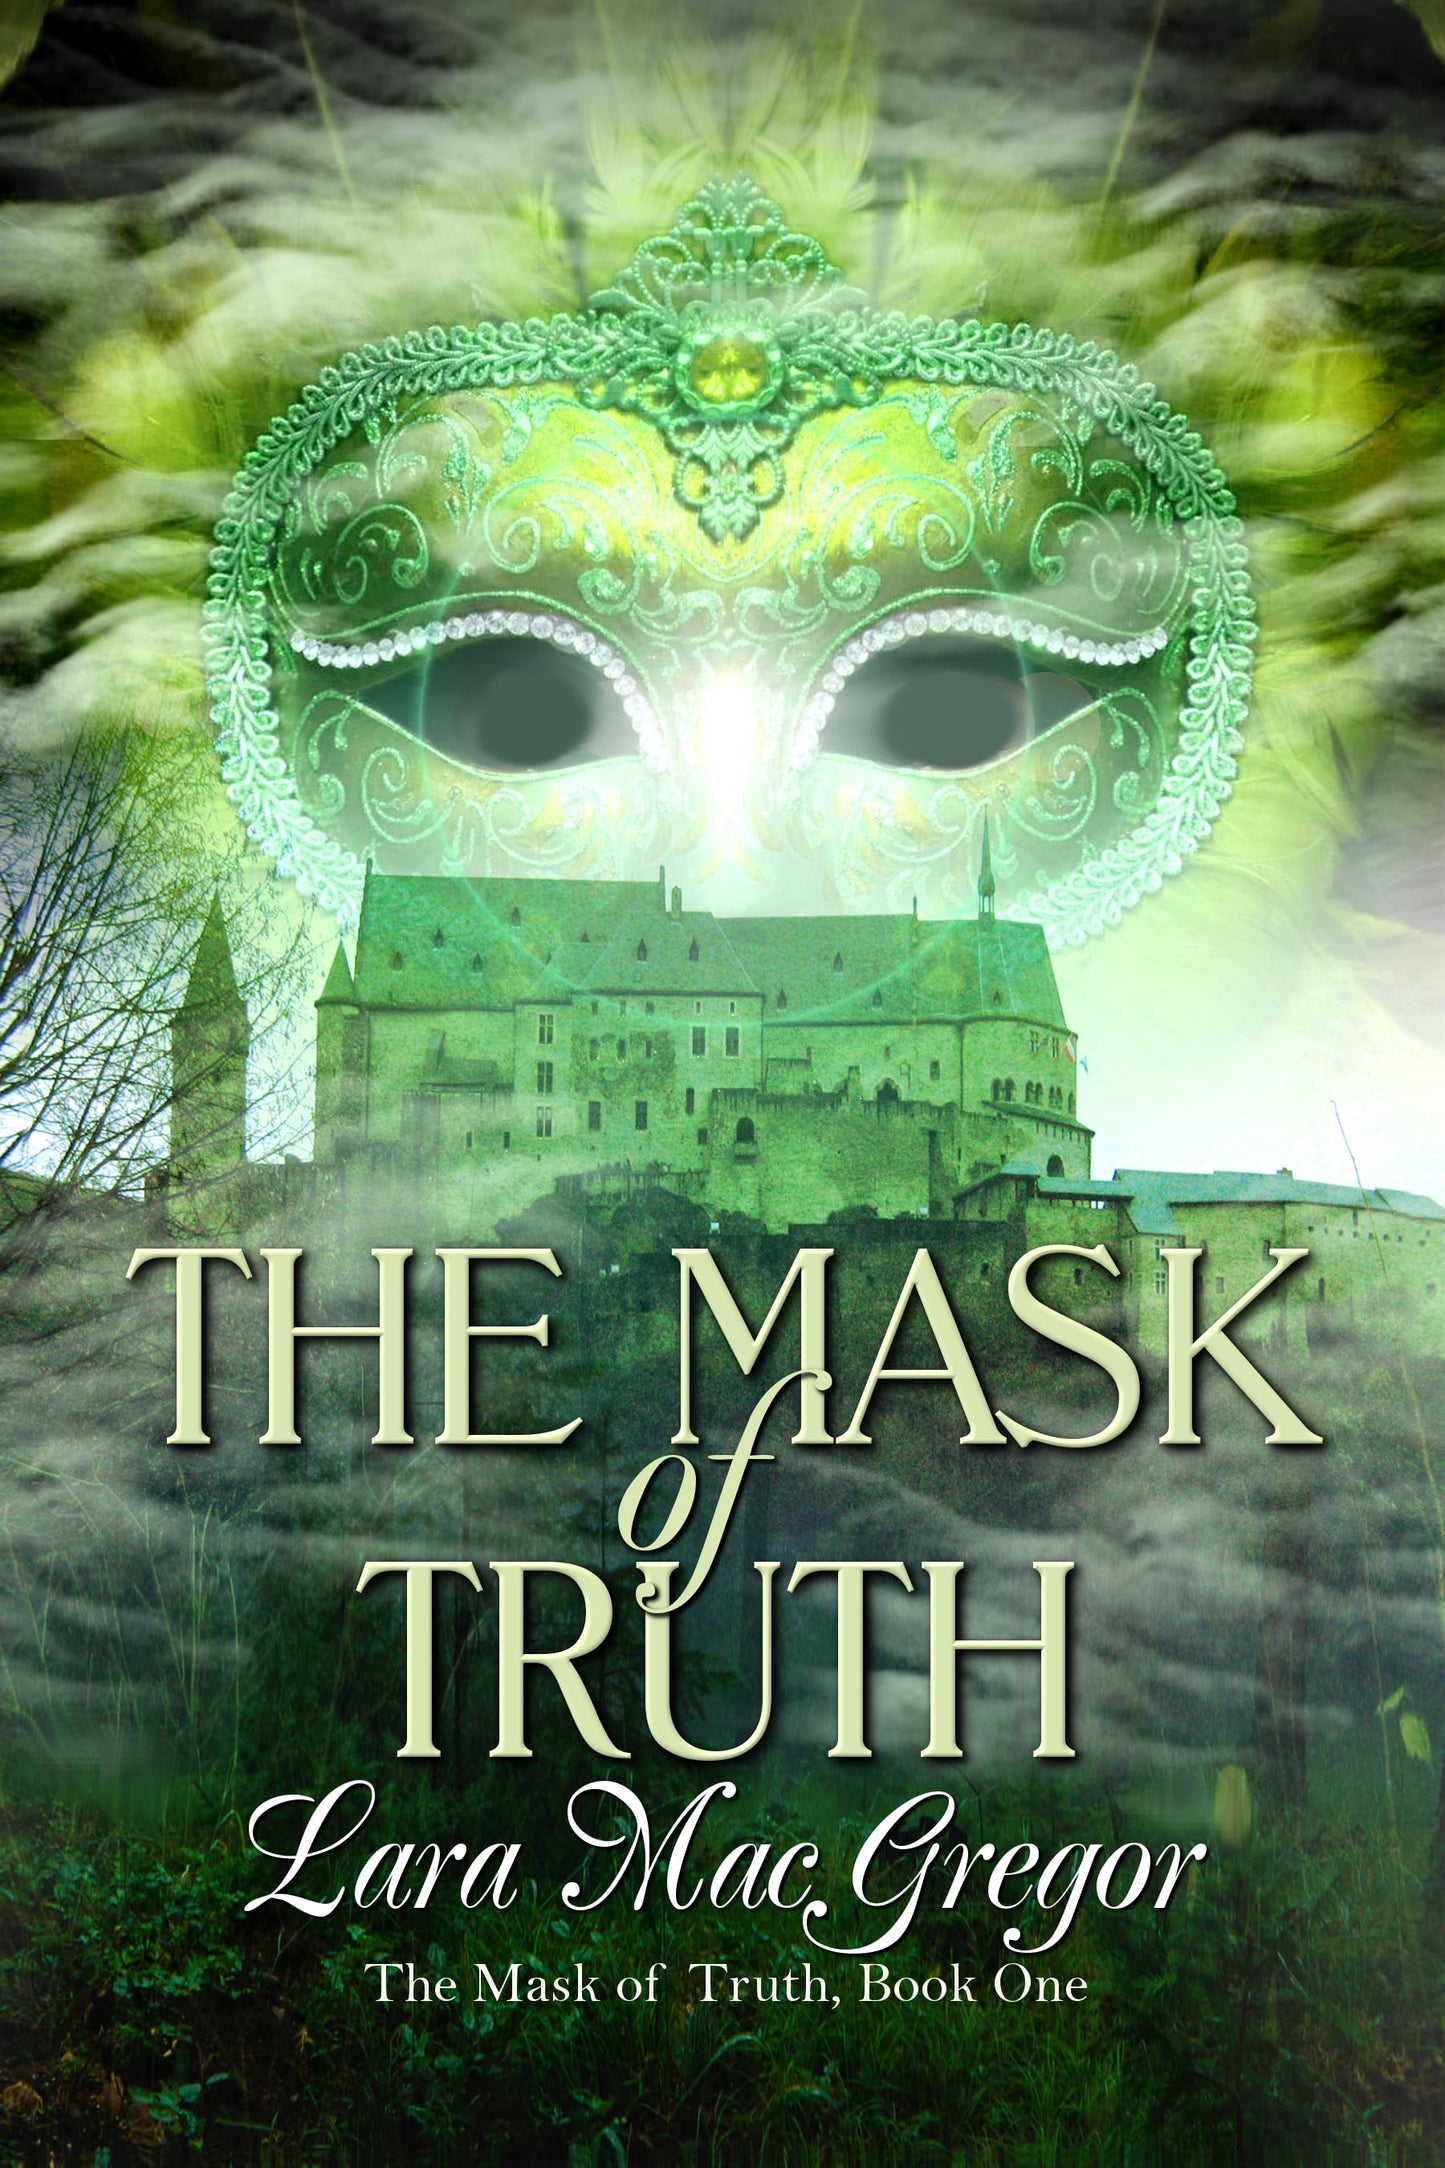 The Mask of Truth